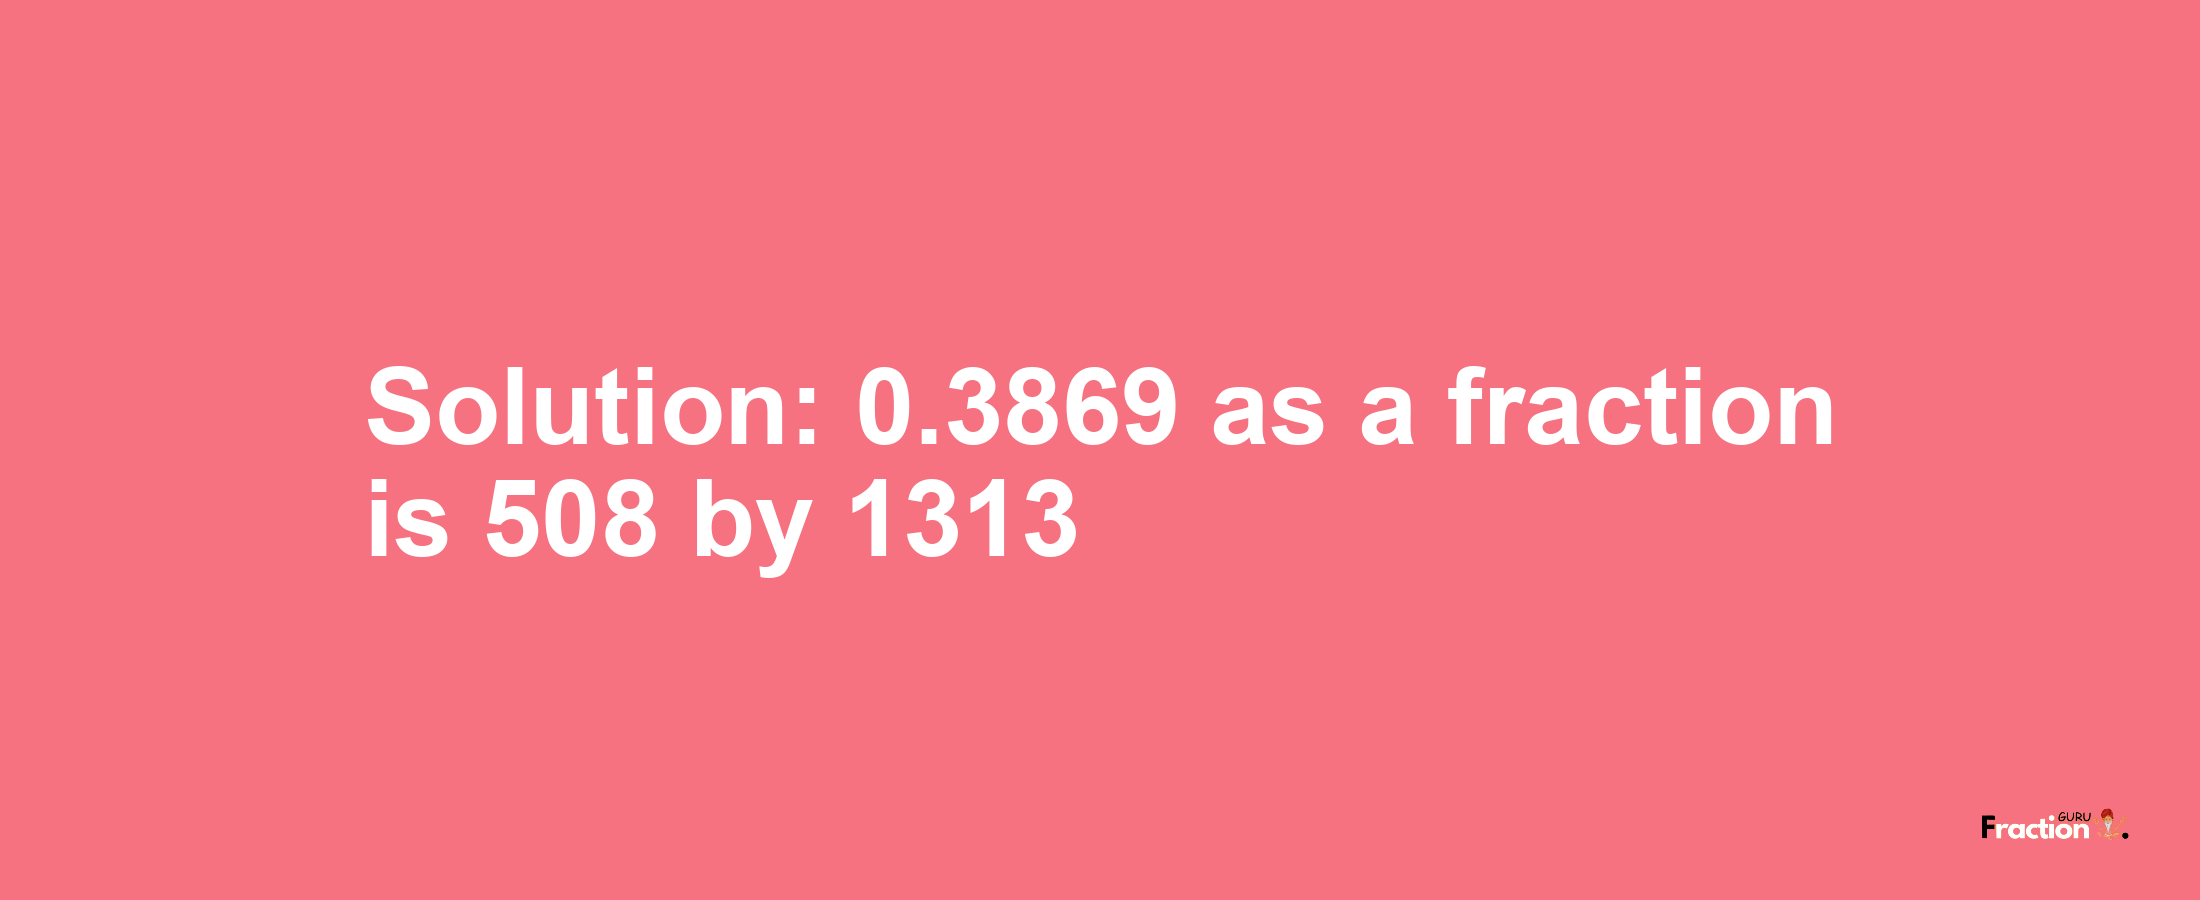 Solution:0.3869 as a fraction is 508/1313